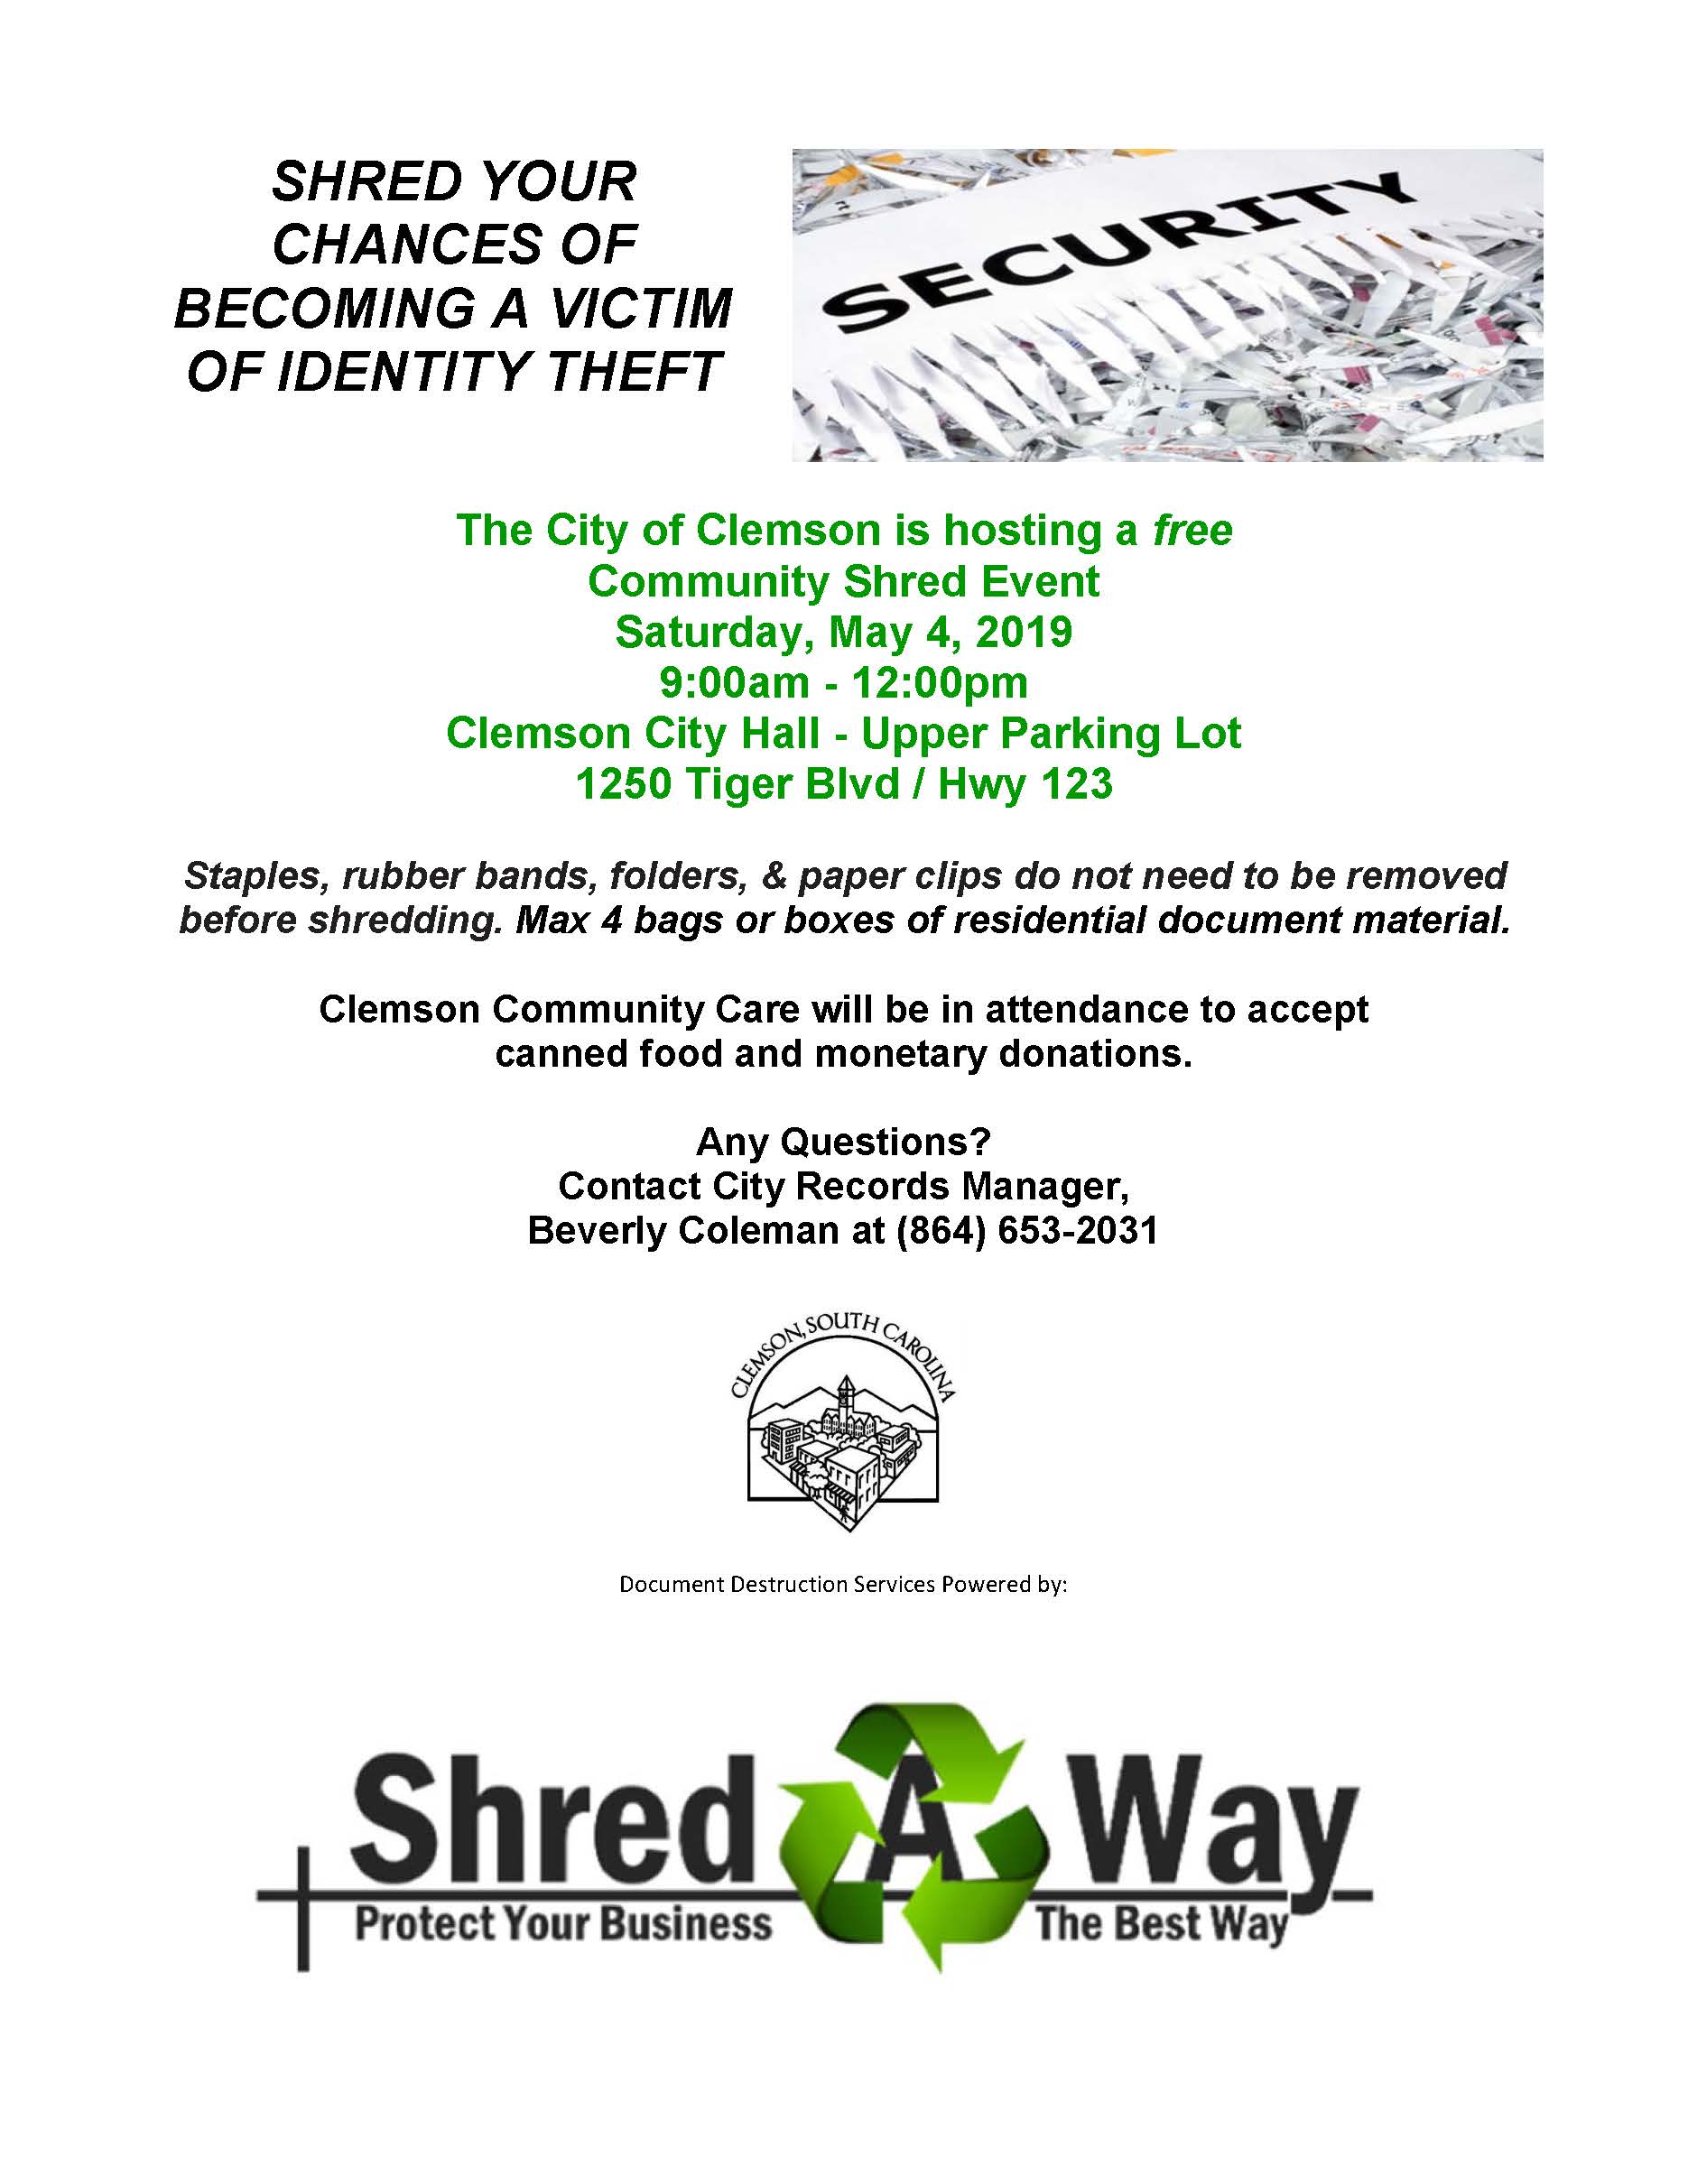 Shred Day May 4th, 2019; Clemson City Hall Upper Parking Lot, 9am to 12pm